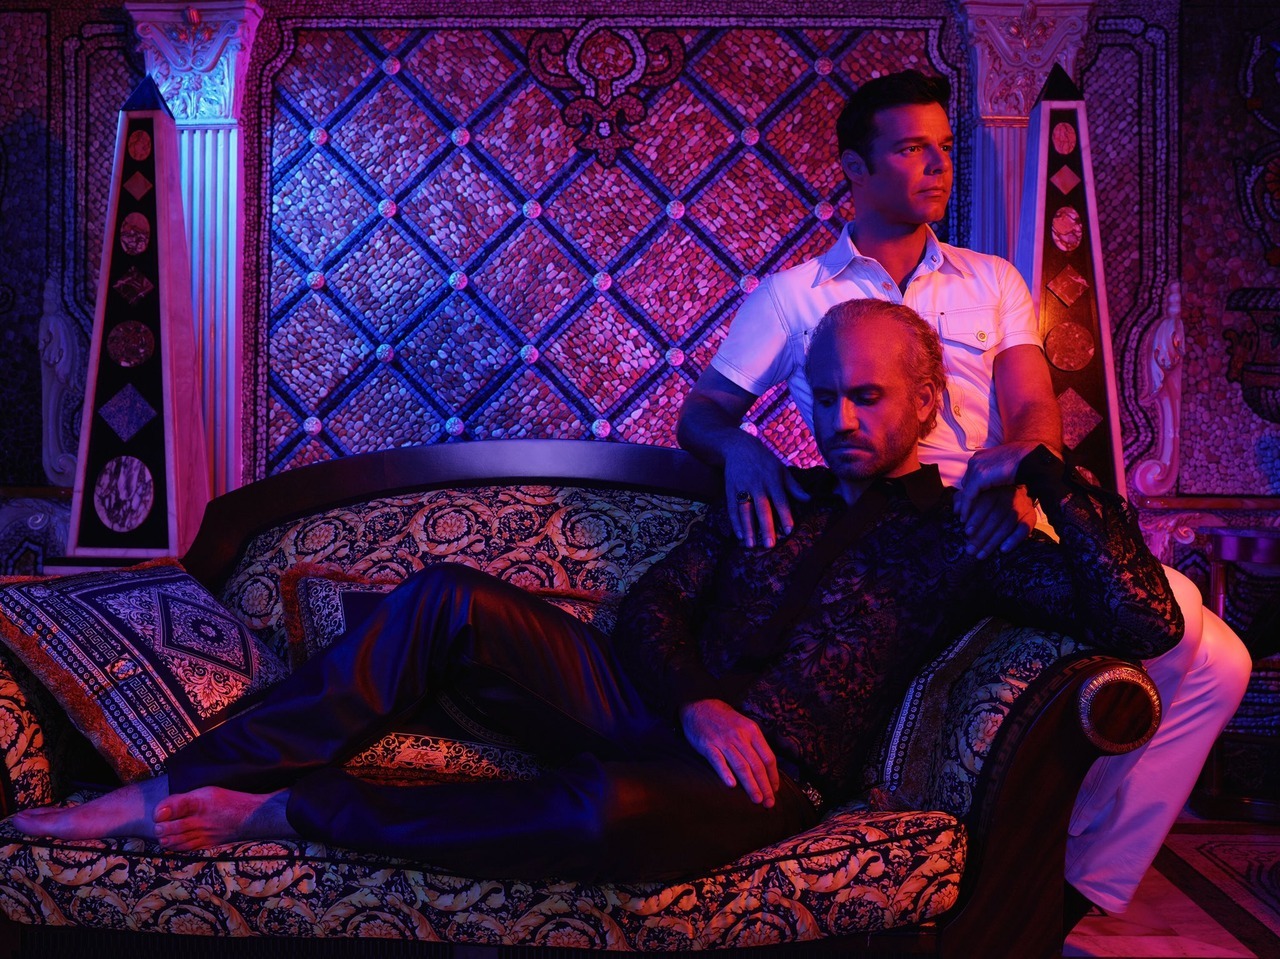 performance - The Assassination of Gianni Versace:  American Crime Story - Page 32 Tumblr_pjbh4aVCAj1wcyxsbo1_1280